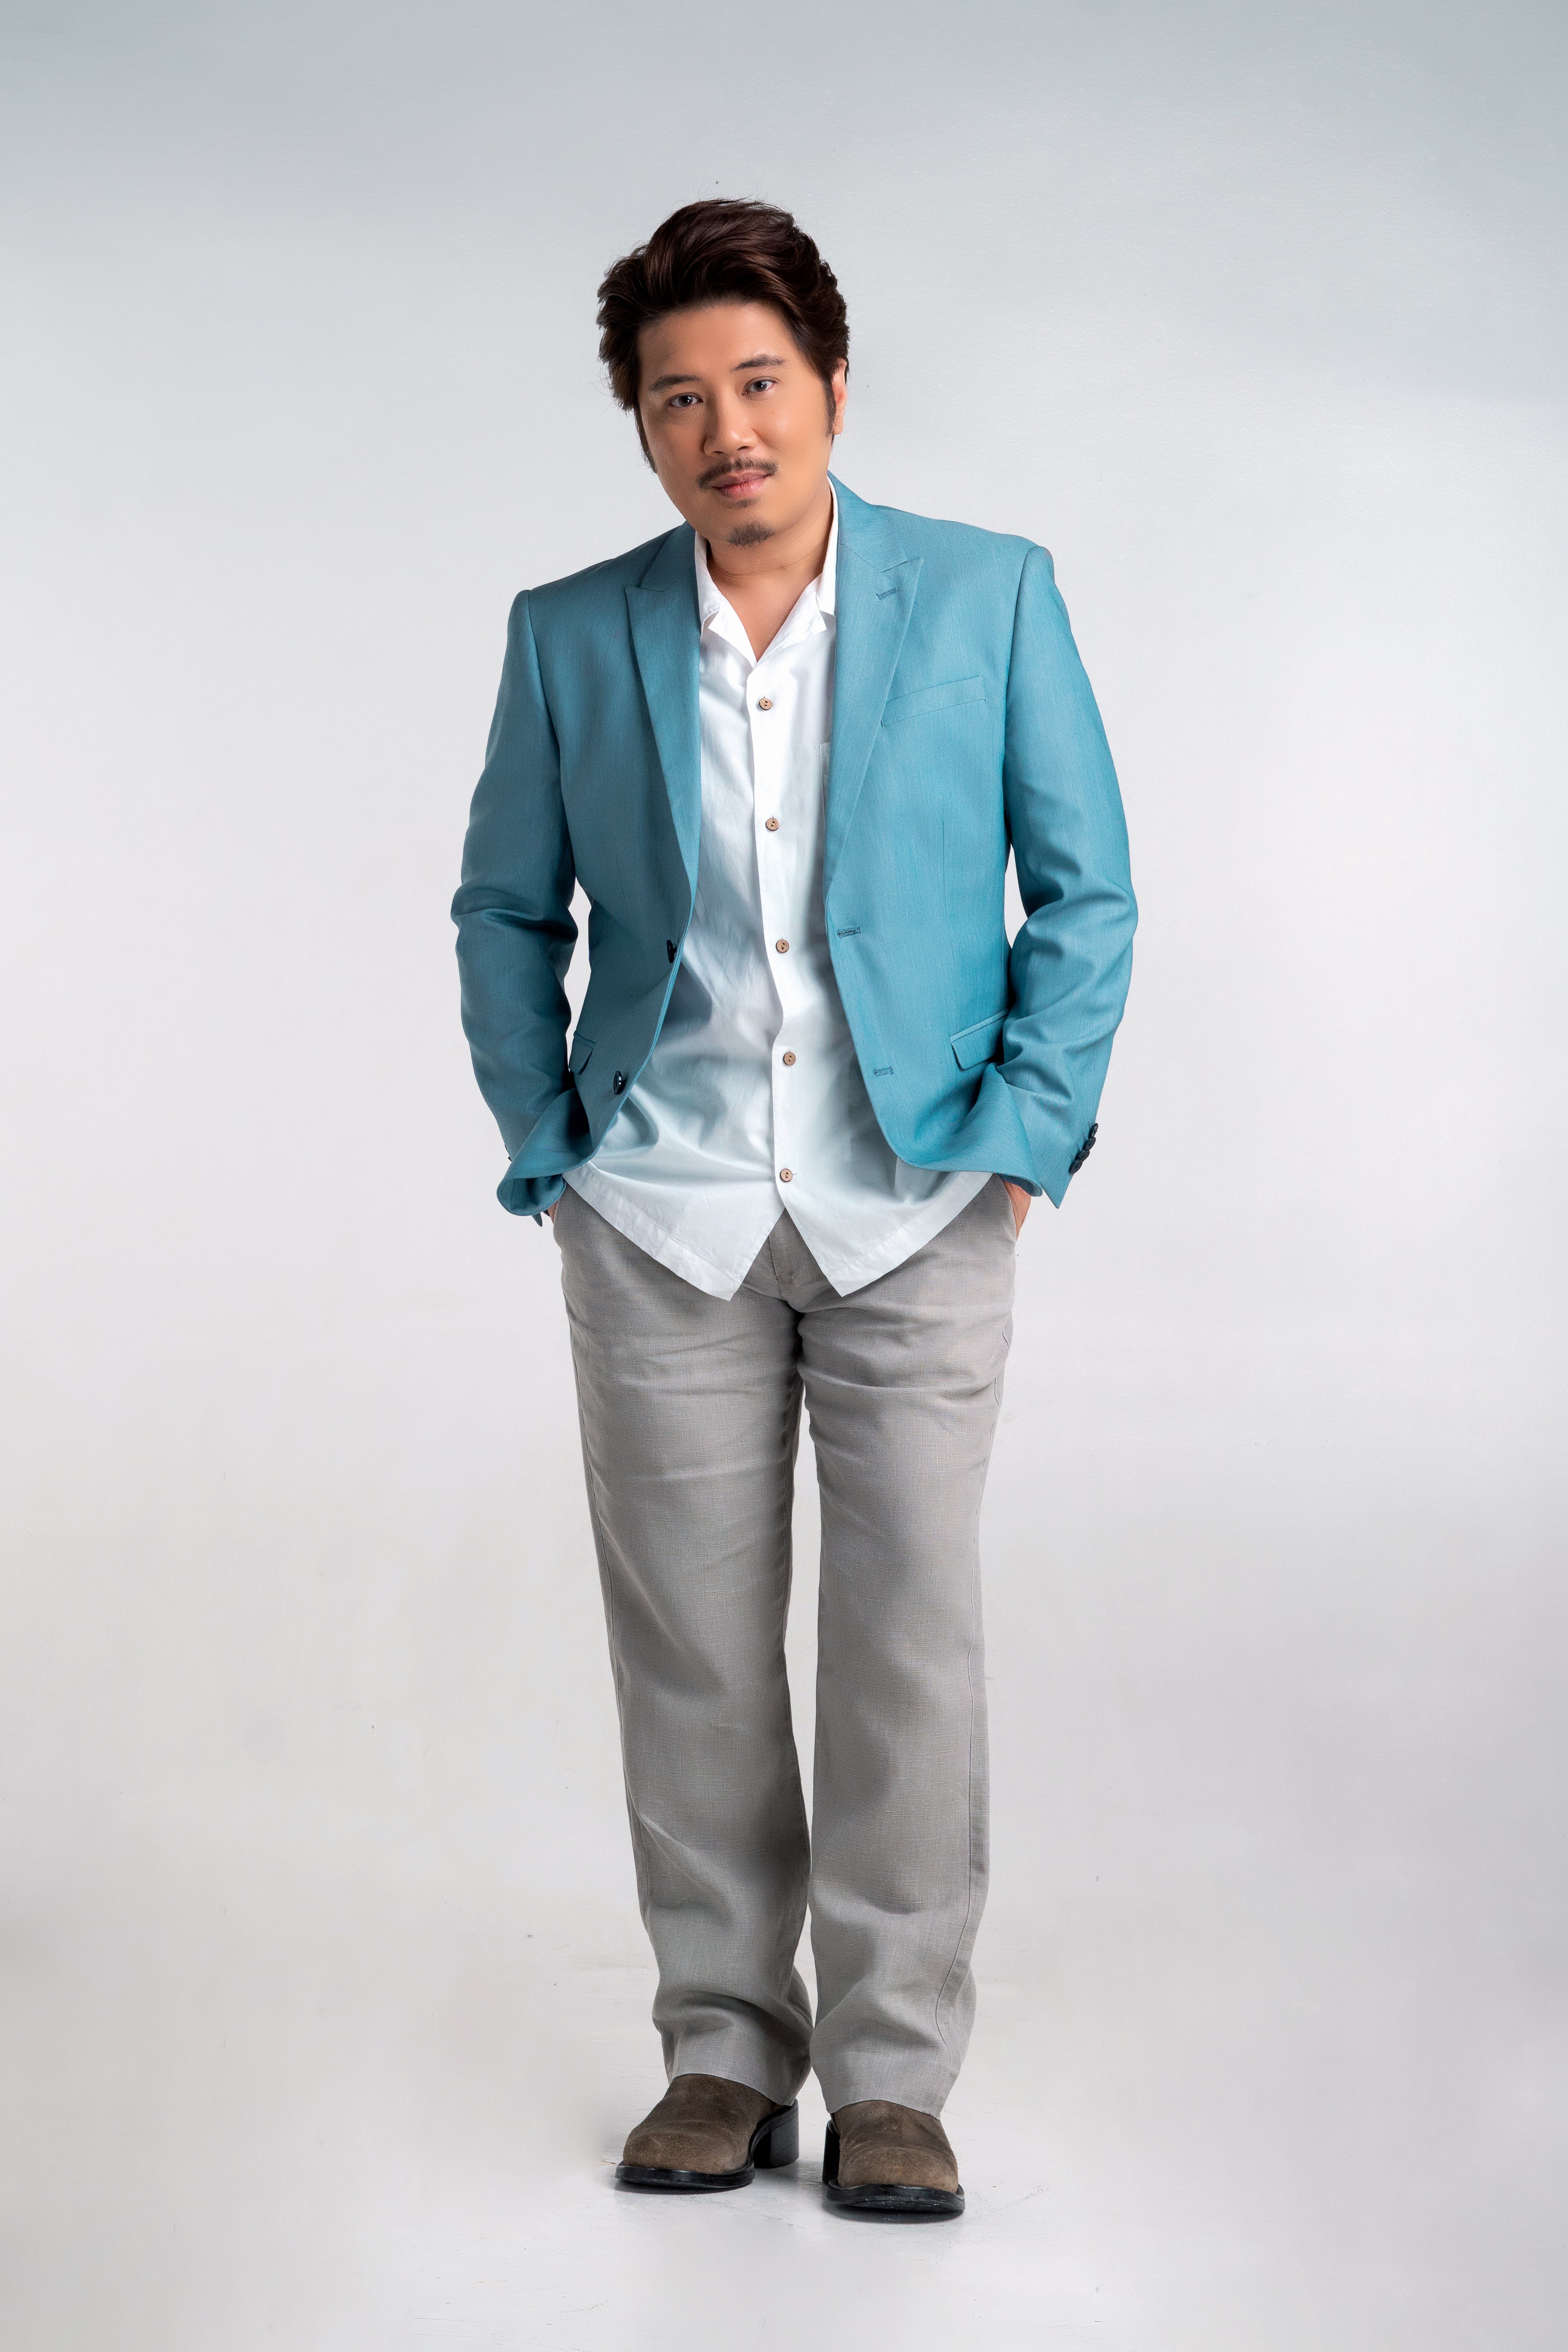 Janno Gibbs defends ‘Pakboys Takusa’: ‘Pure humor, not about political correctness’